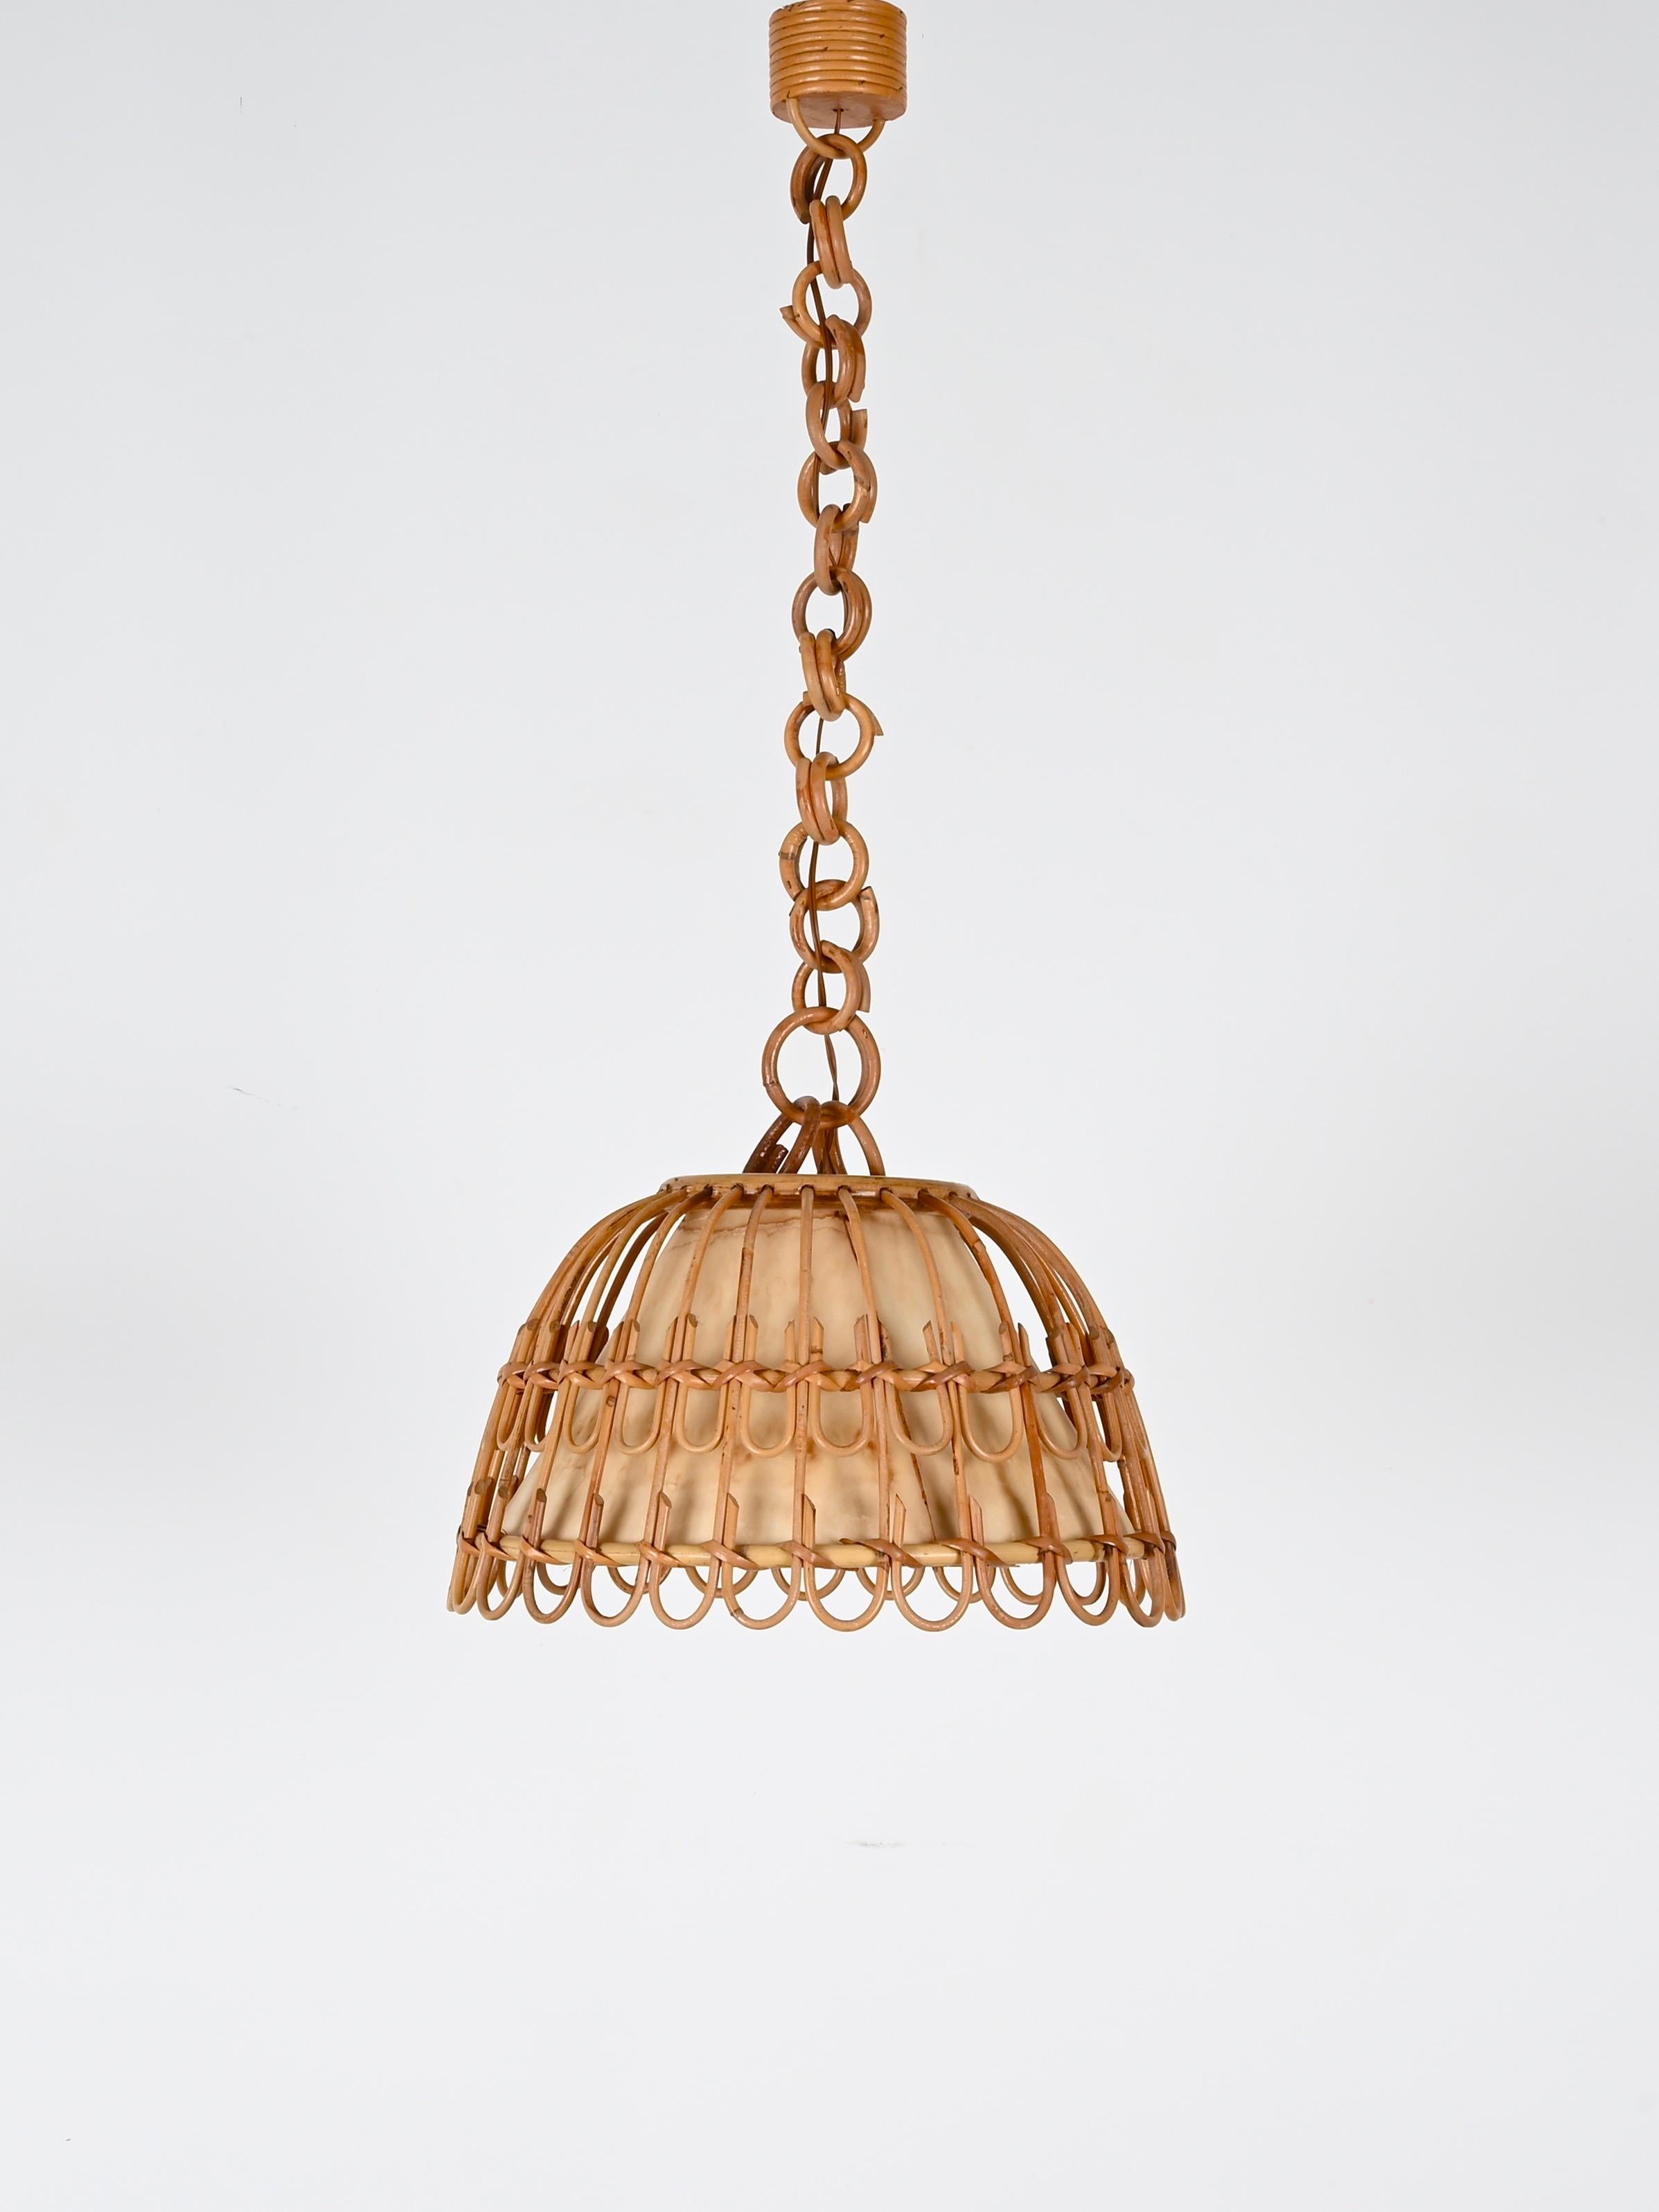 Delightful Mid-Century Cote d'Azur style pendant fully made in curved rattan and hand-woven wicker. This stunning pendant was hand-made in Italy during the 1960s. 

This gorgeous chandelier features a round shade in rattan enriched with stunning